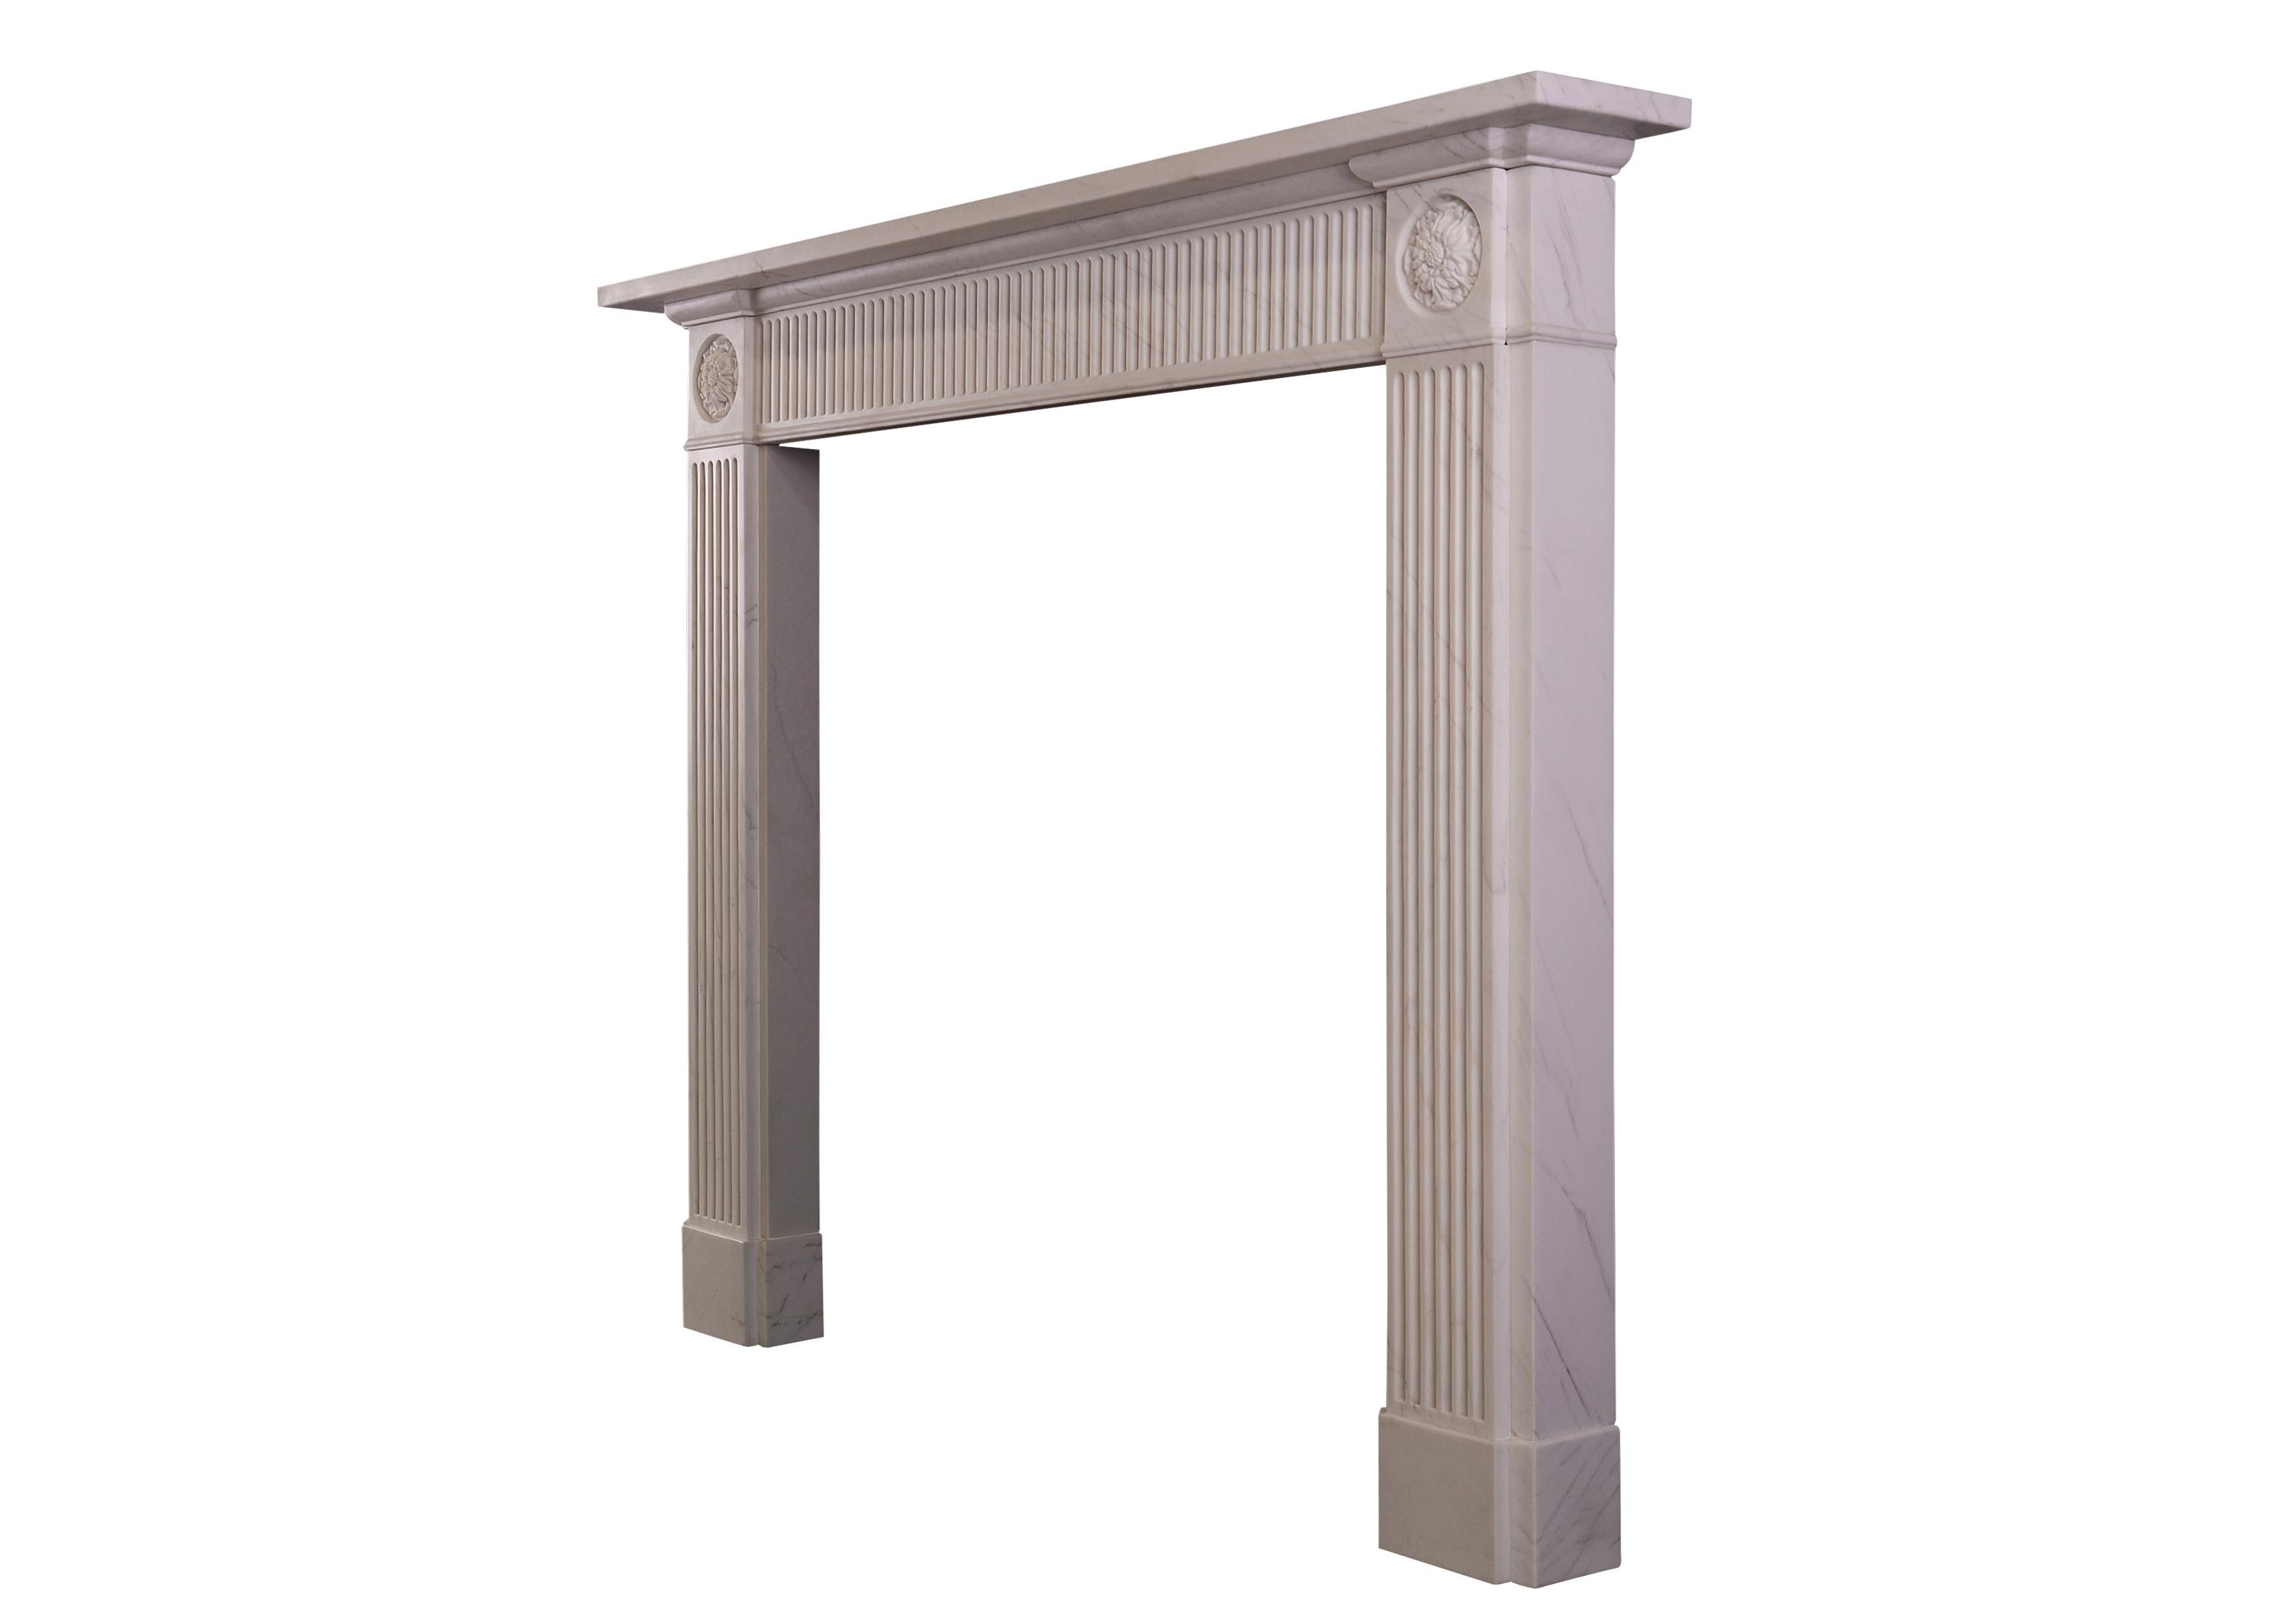 19th Century White Marble Fireplace in the Regency Style